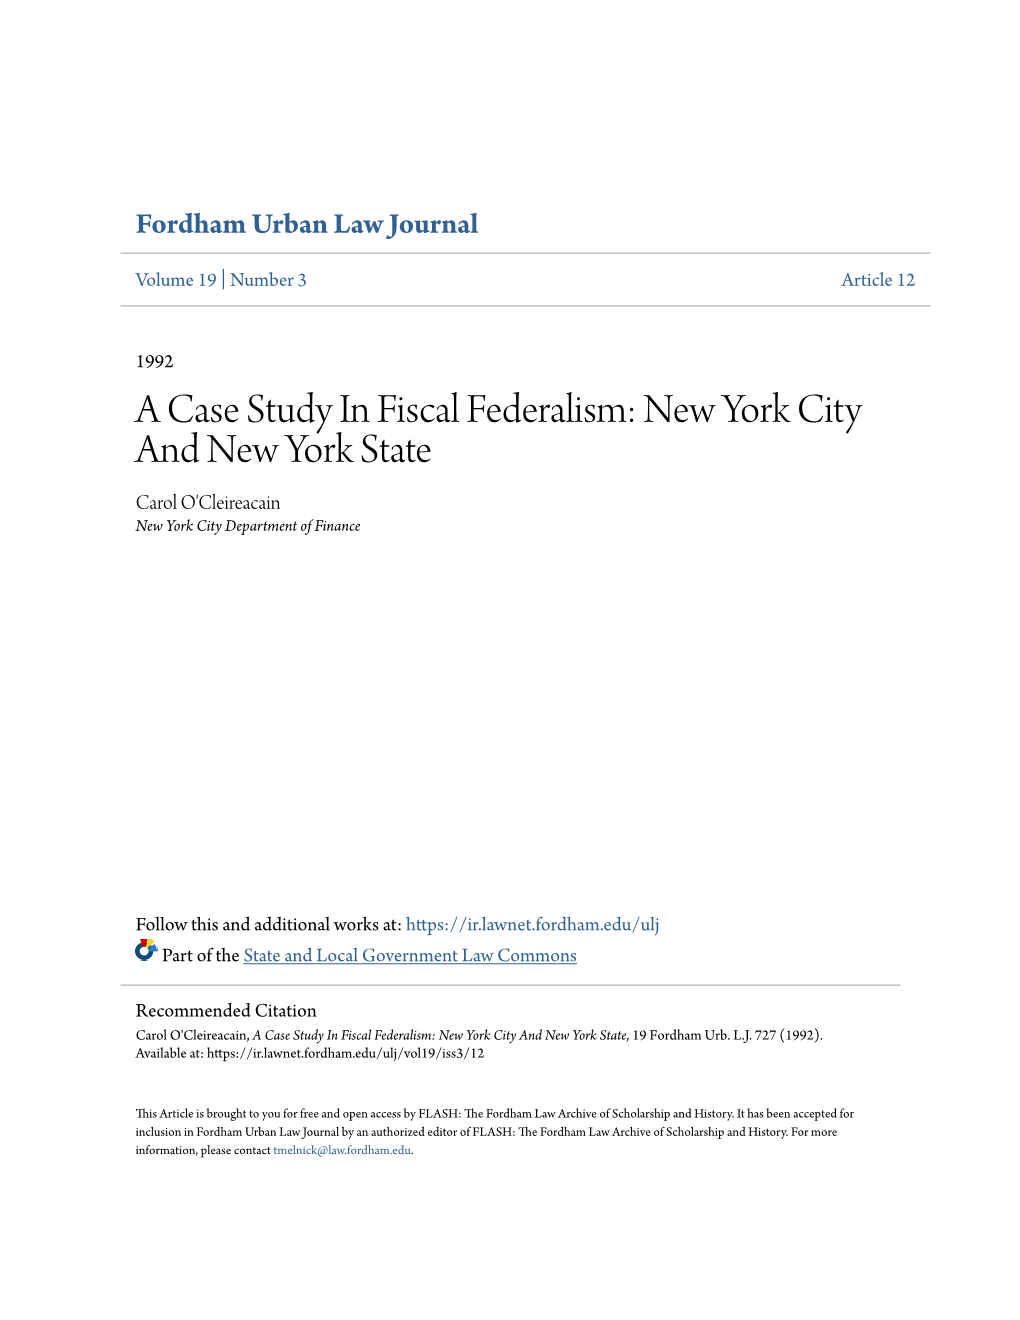 A Case Study in Fiscal Federalism: New York City and New York State Carol O'cleireacain New York City Department of Finance